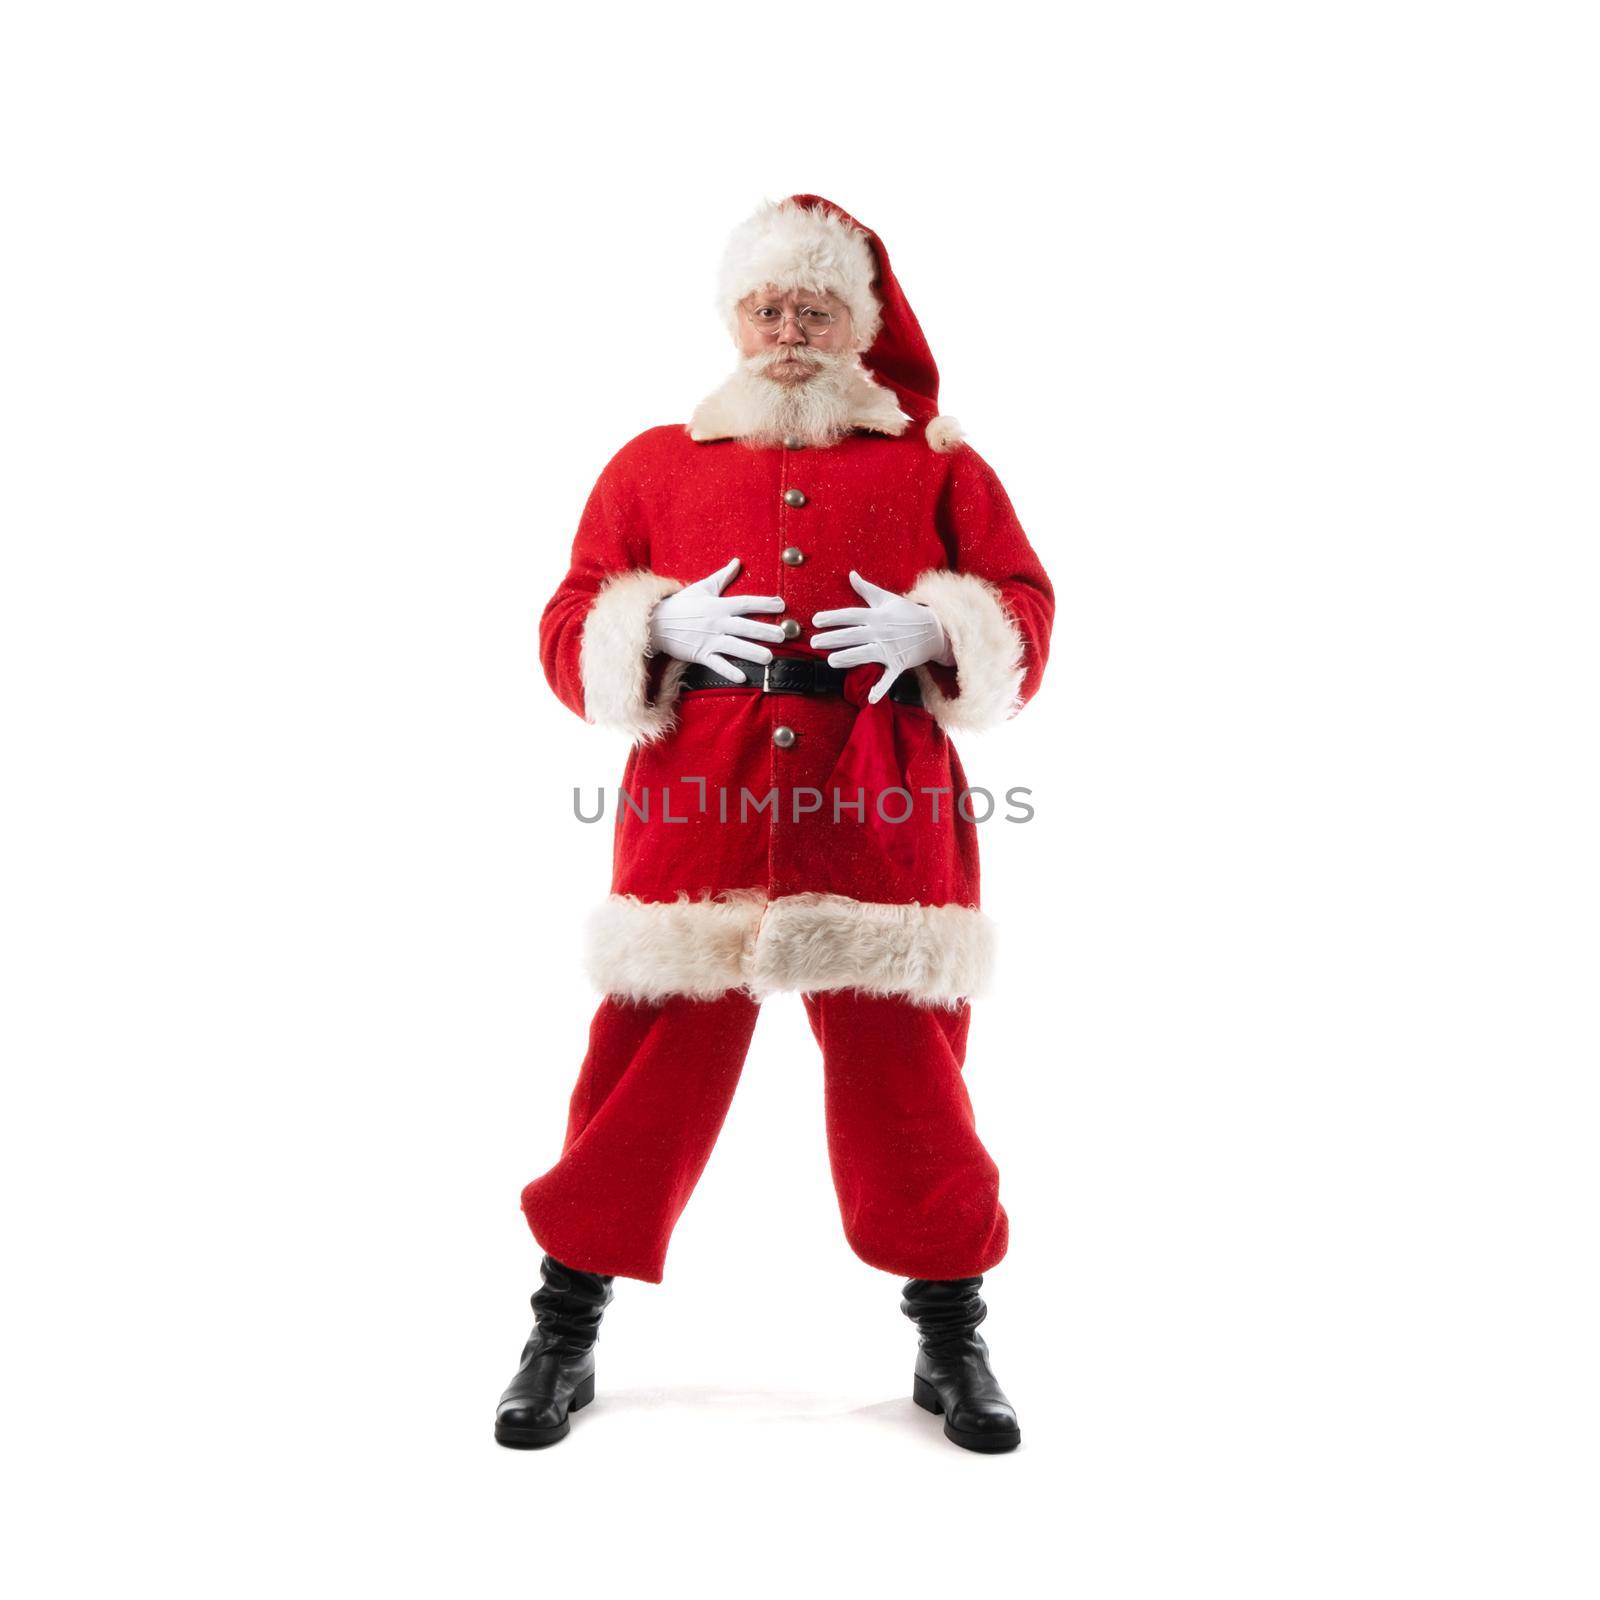 Santa Claus with hands on belly by ALotOfPeople